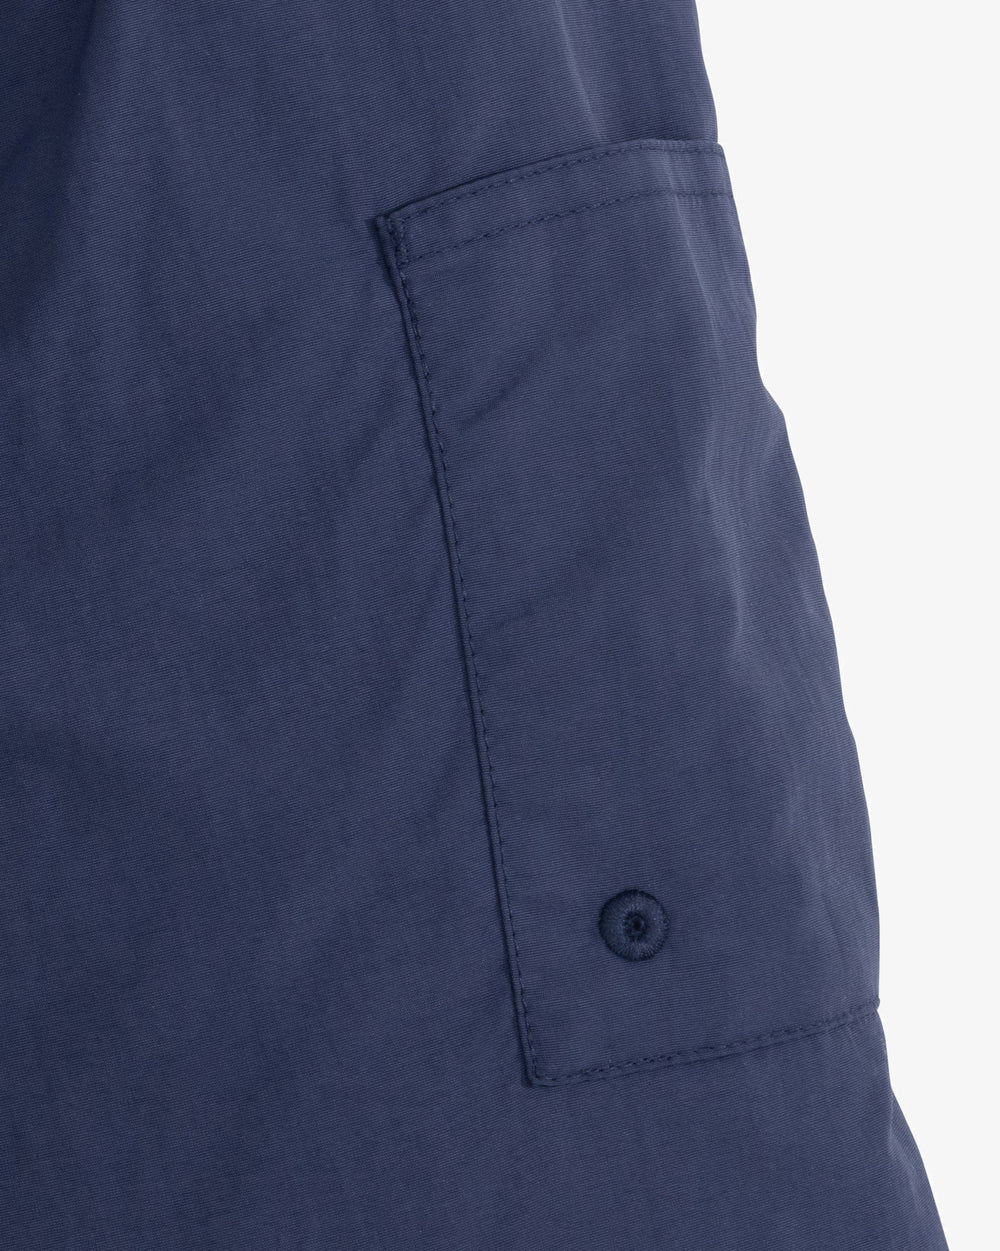 The detail view of the Boys shoreline active short - True Navy